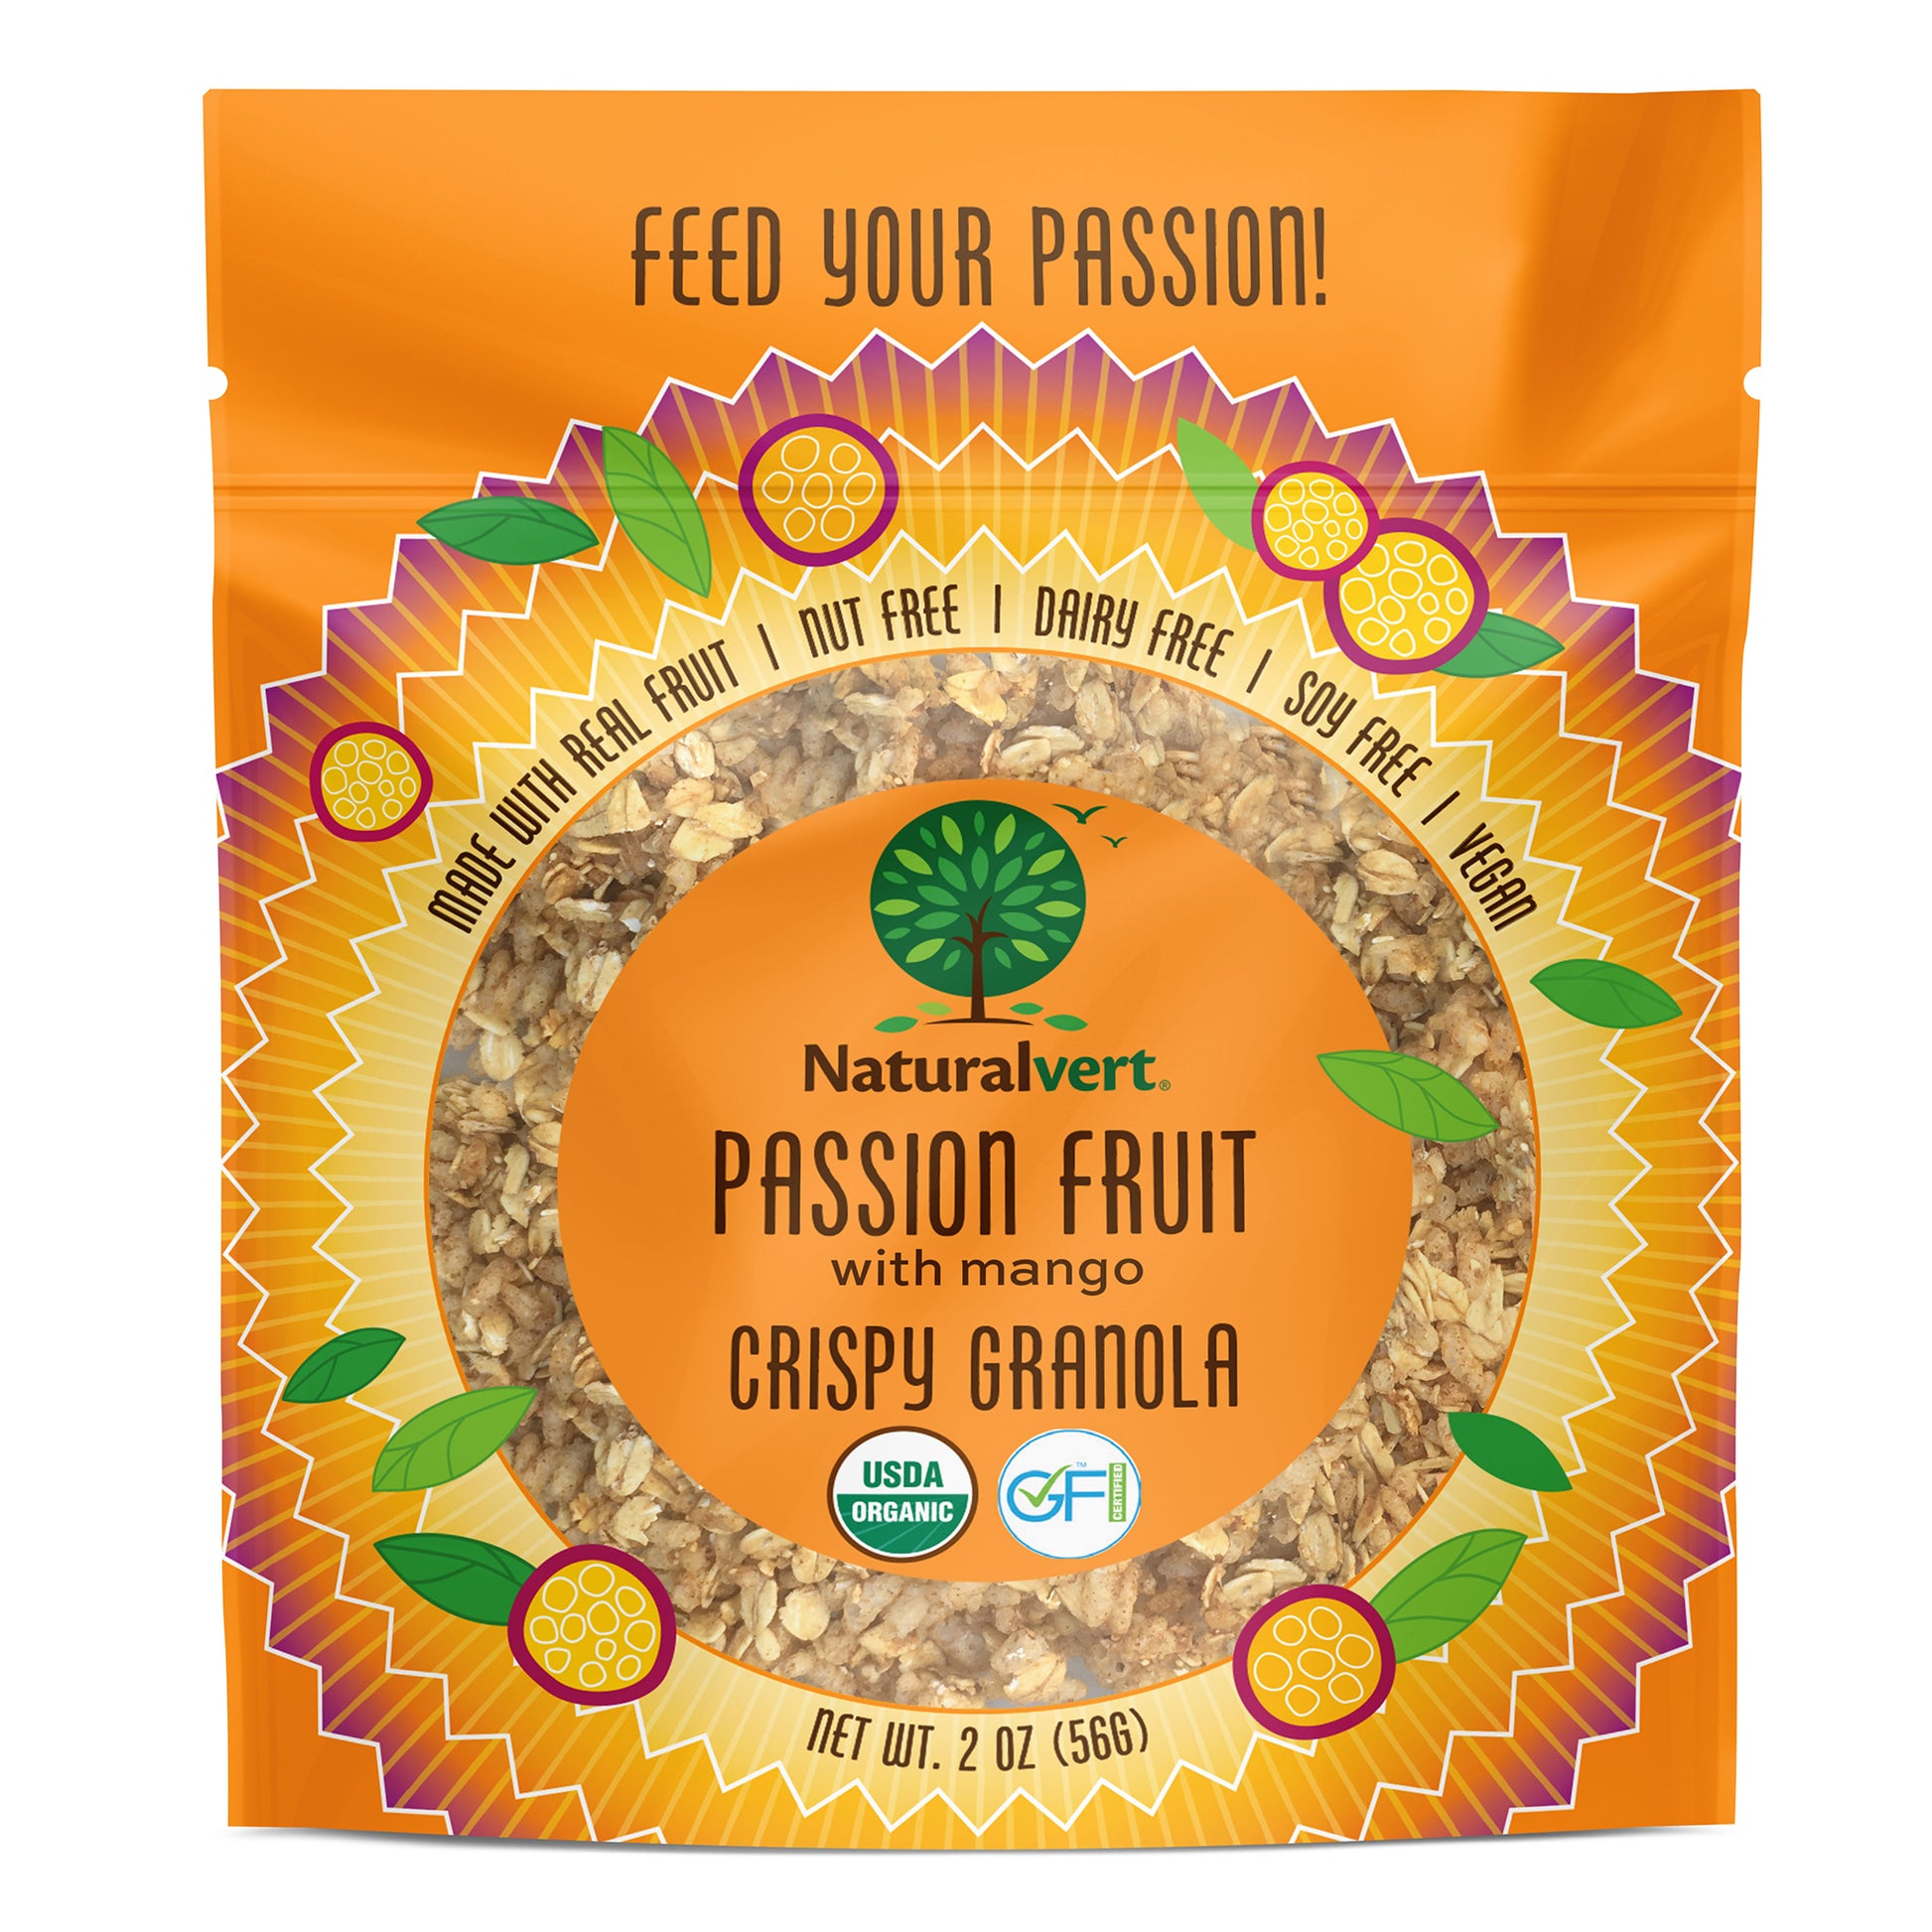 Organic, Gluten-free, vegan granola. made with real fruit. Nut free, soy free, dairy free. flavor Passion fruit 2oz